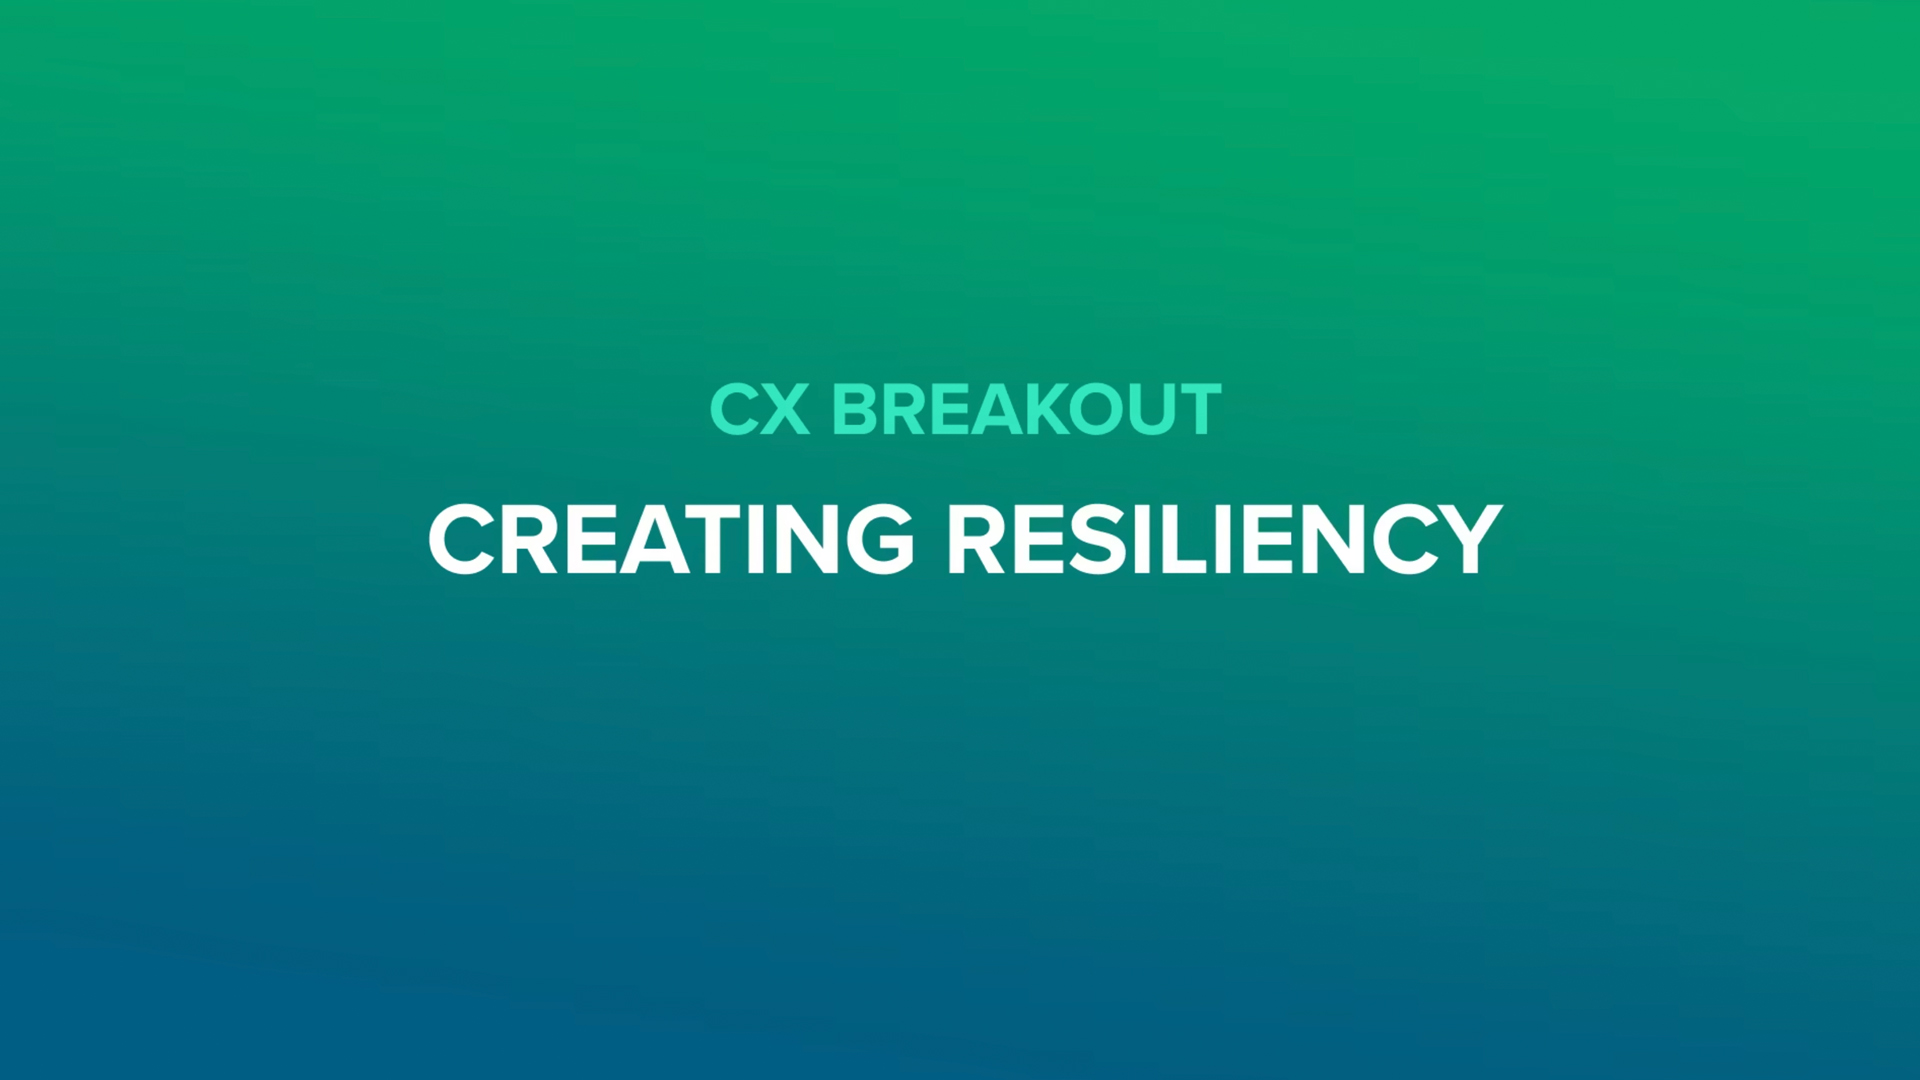 CX Breakout - Creating Resiliency